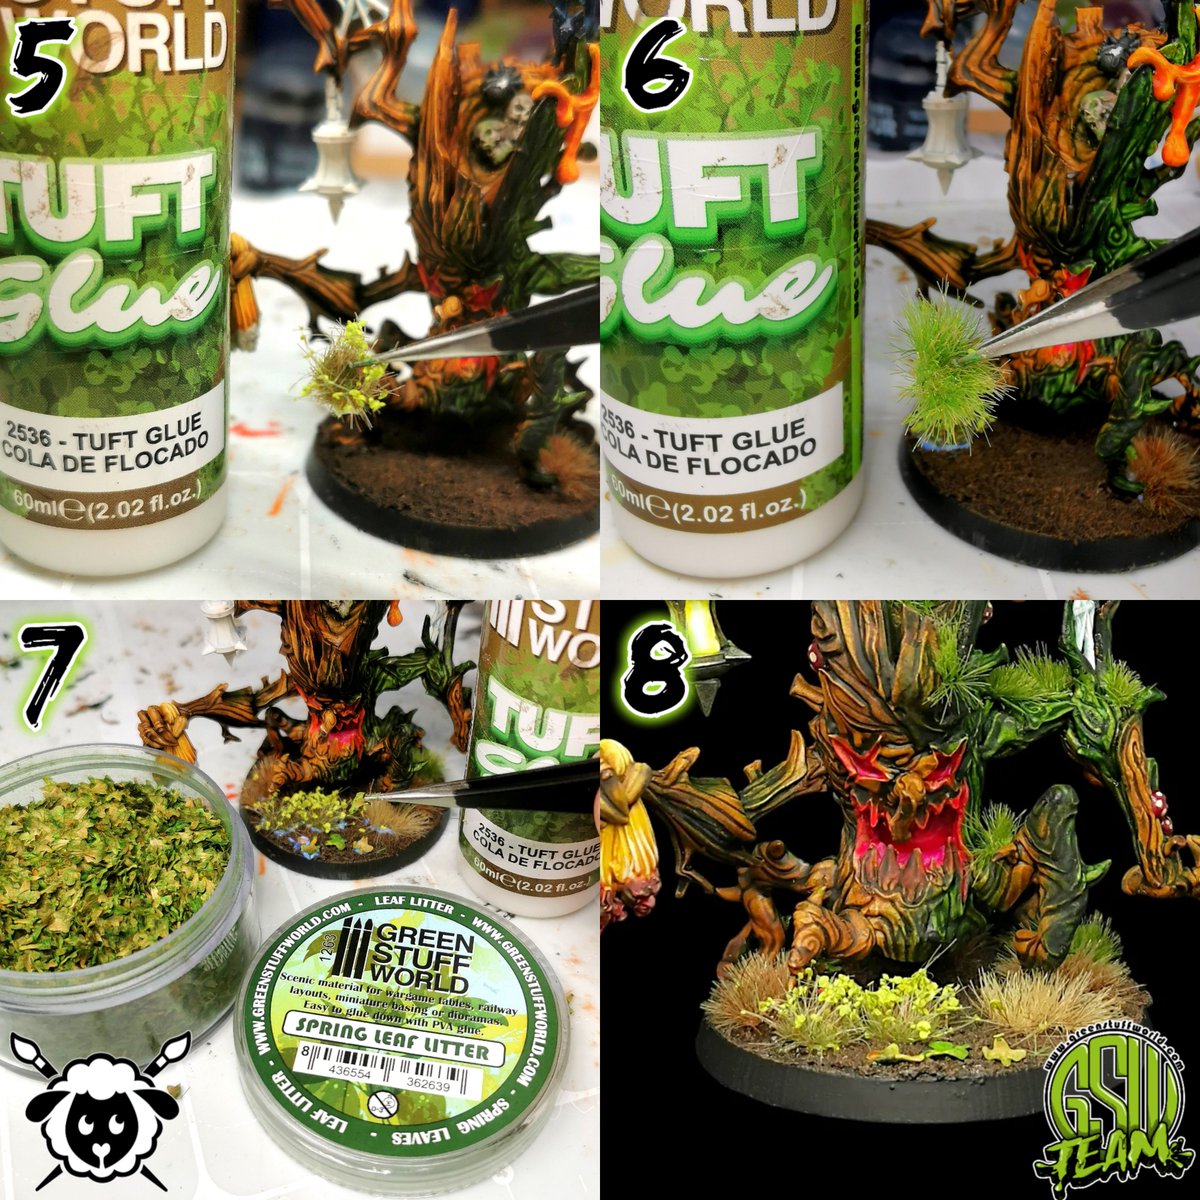 See how our collaborator Silvia @followtheblacksheep bases look like, using the materials to create a woodland atmosphere. If you visit our catalogue you will discover dozens of similar products for your miniatures! #warhammer #paintingminiatures #miniatures #paintingwarhammer